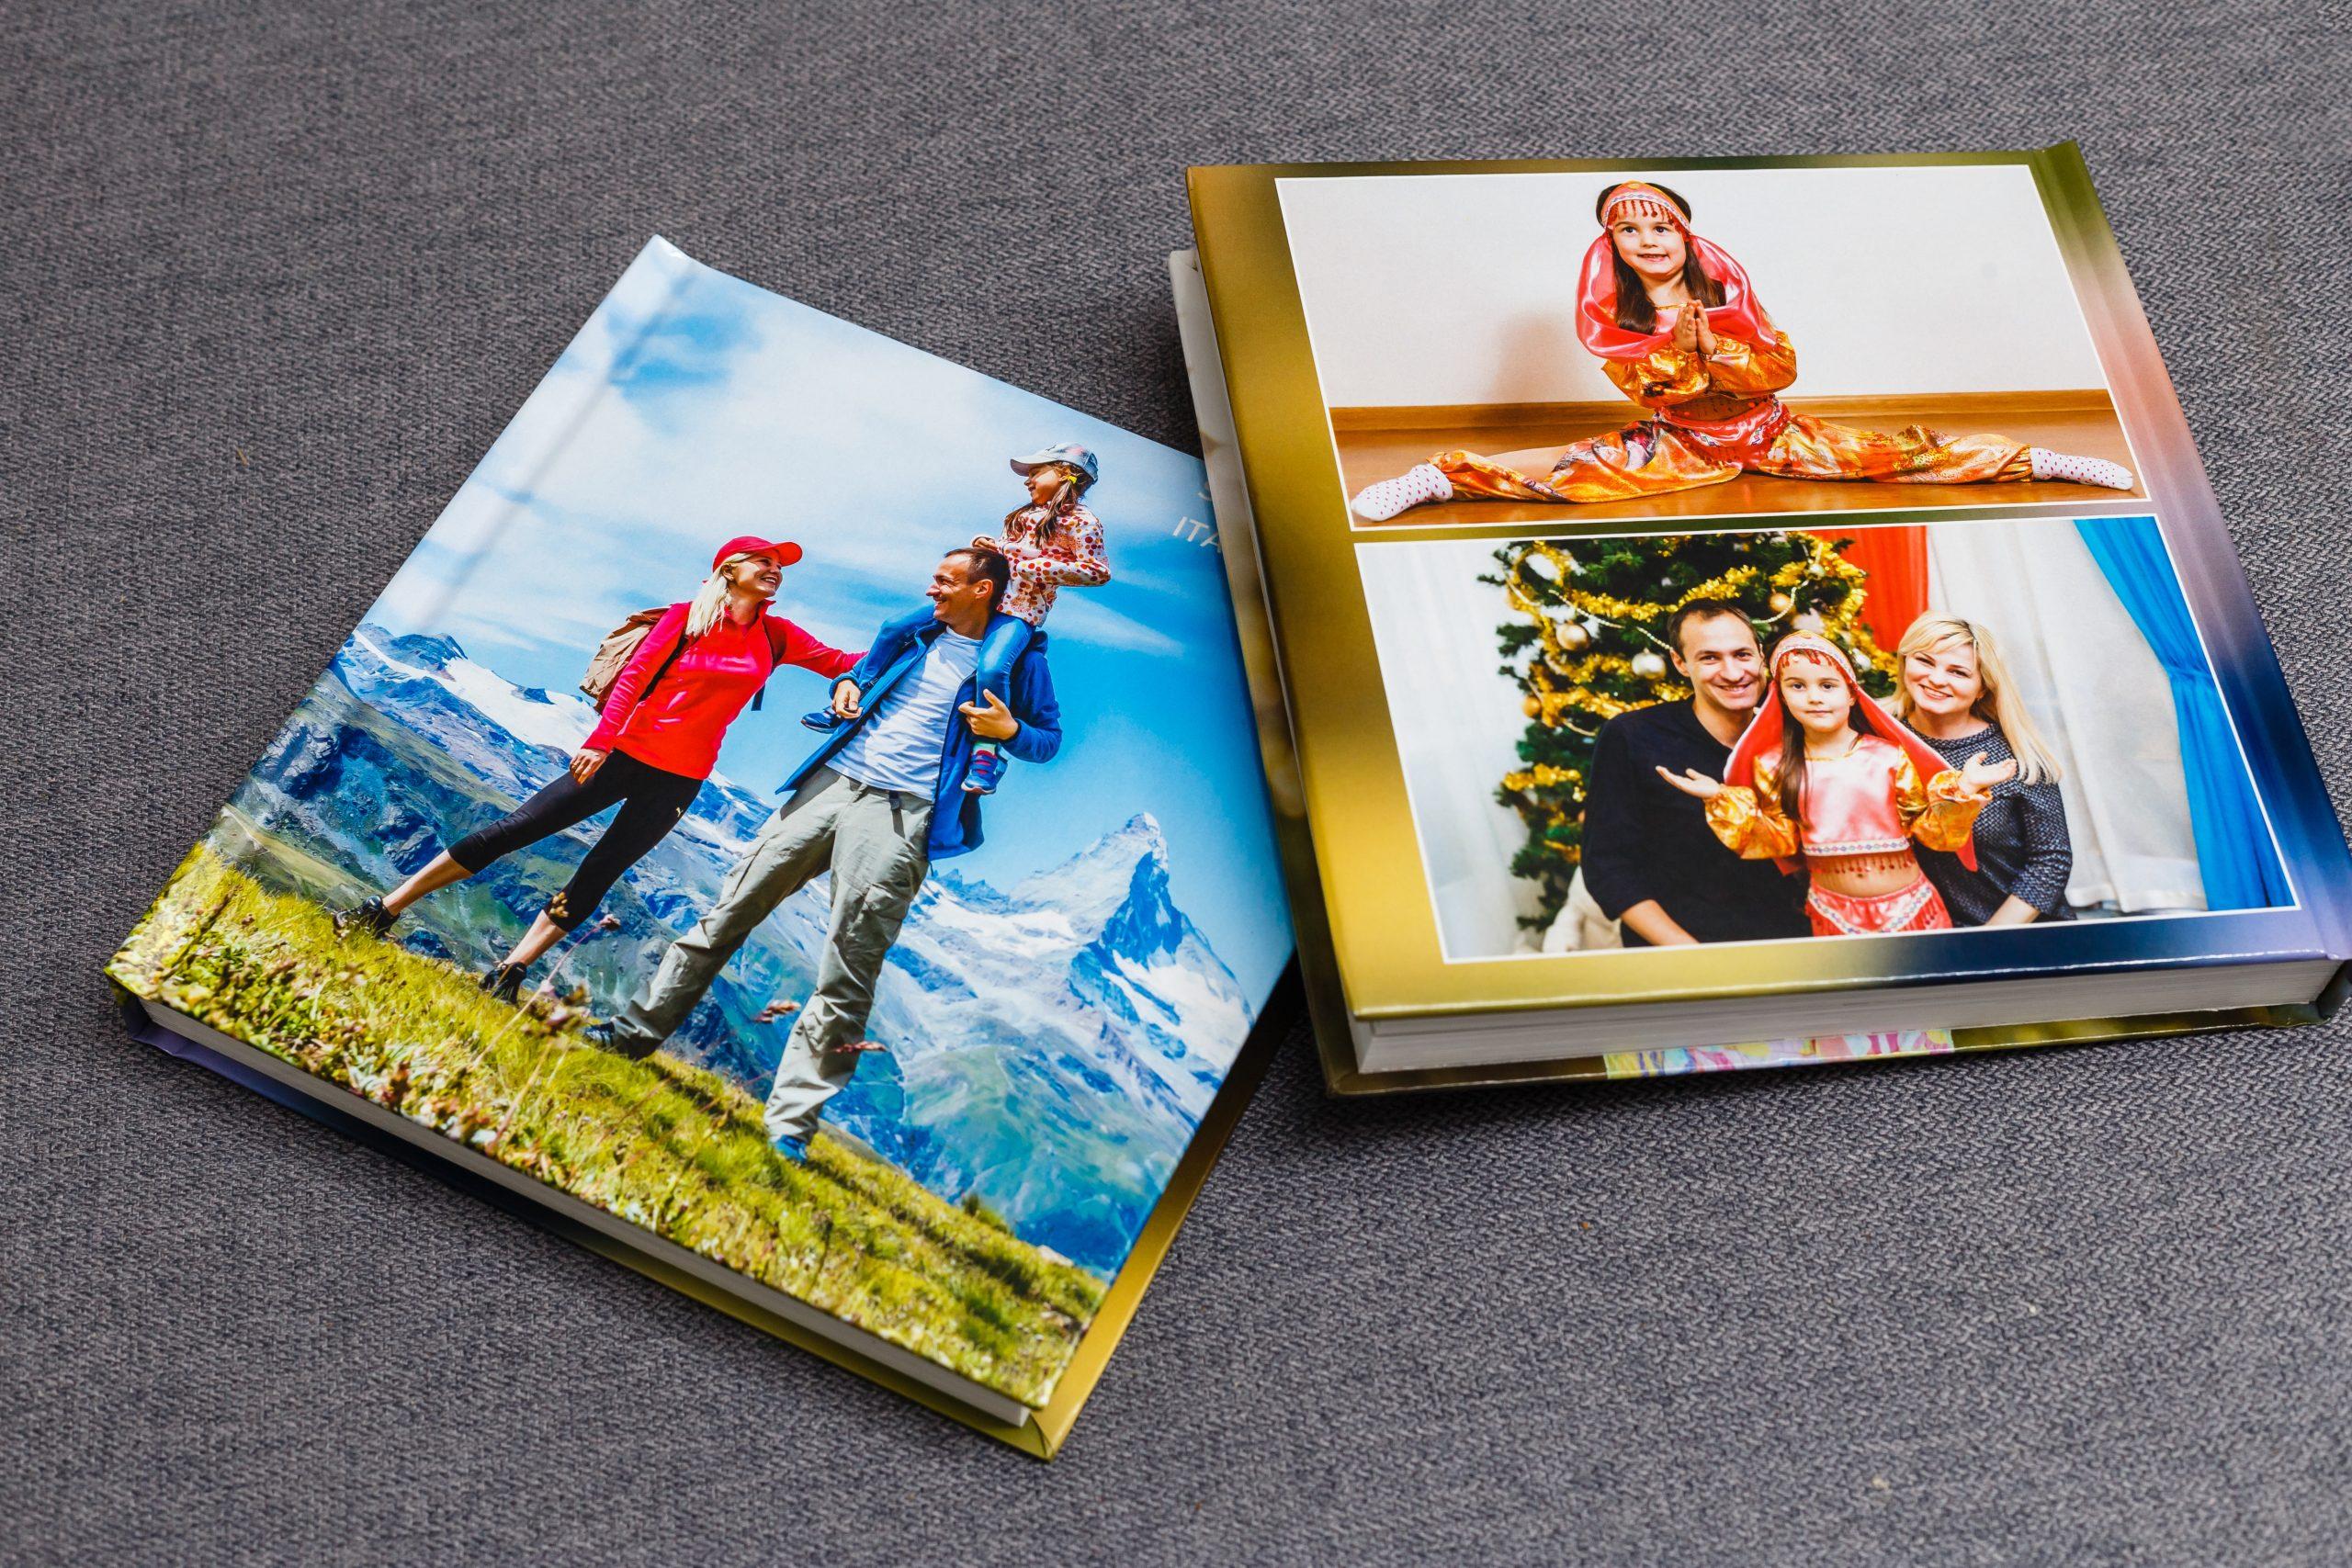 Why Choose Printposter for your Photo Prints